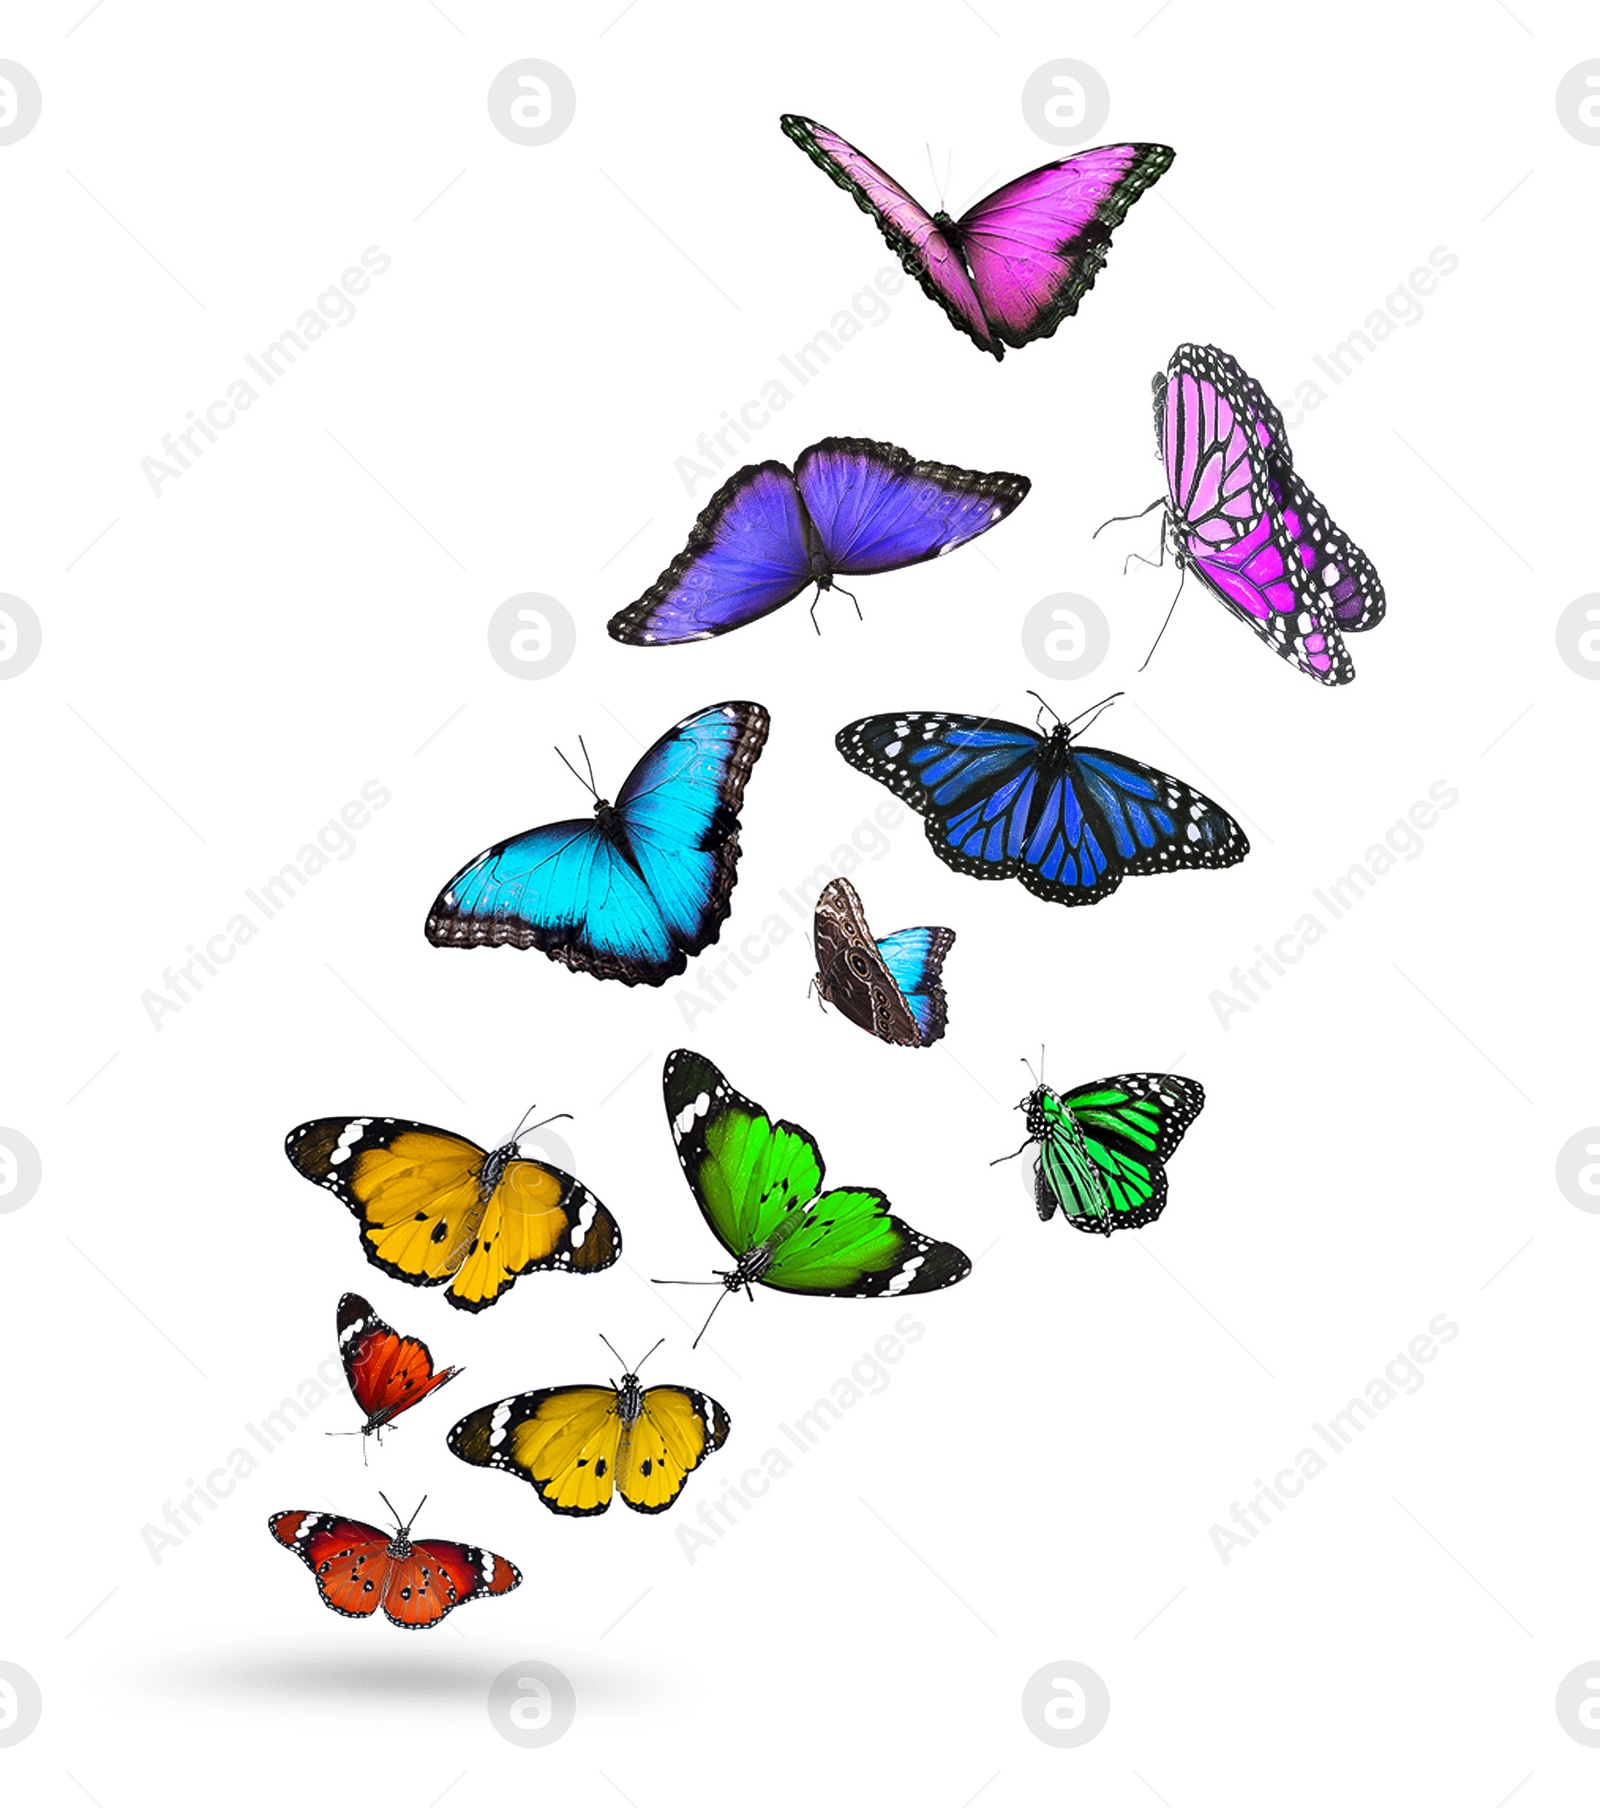 Image of Many beautiful colorful butterflies flying on white background